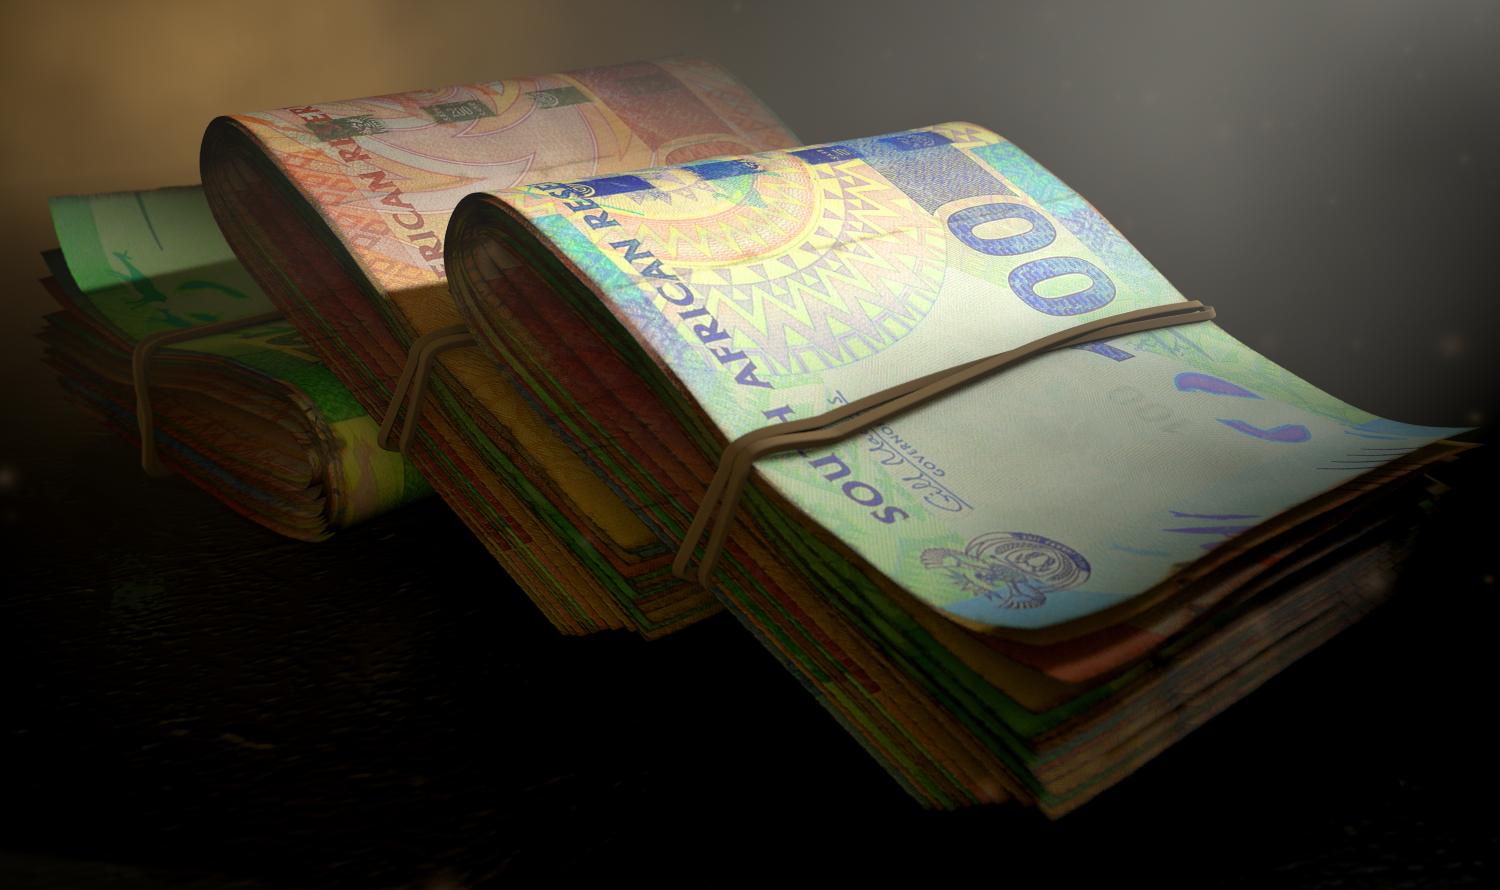 Stacks of South African banknotes